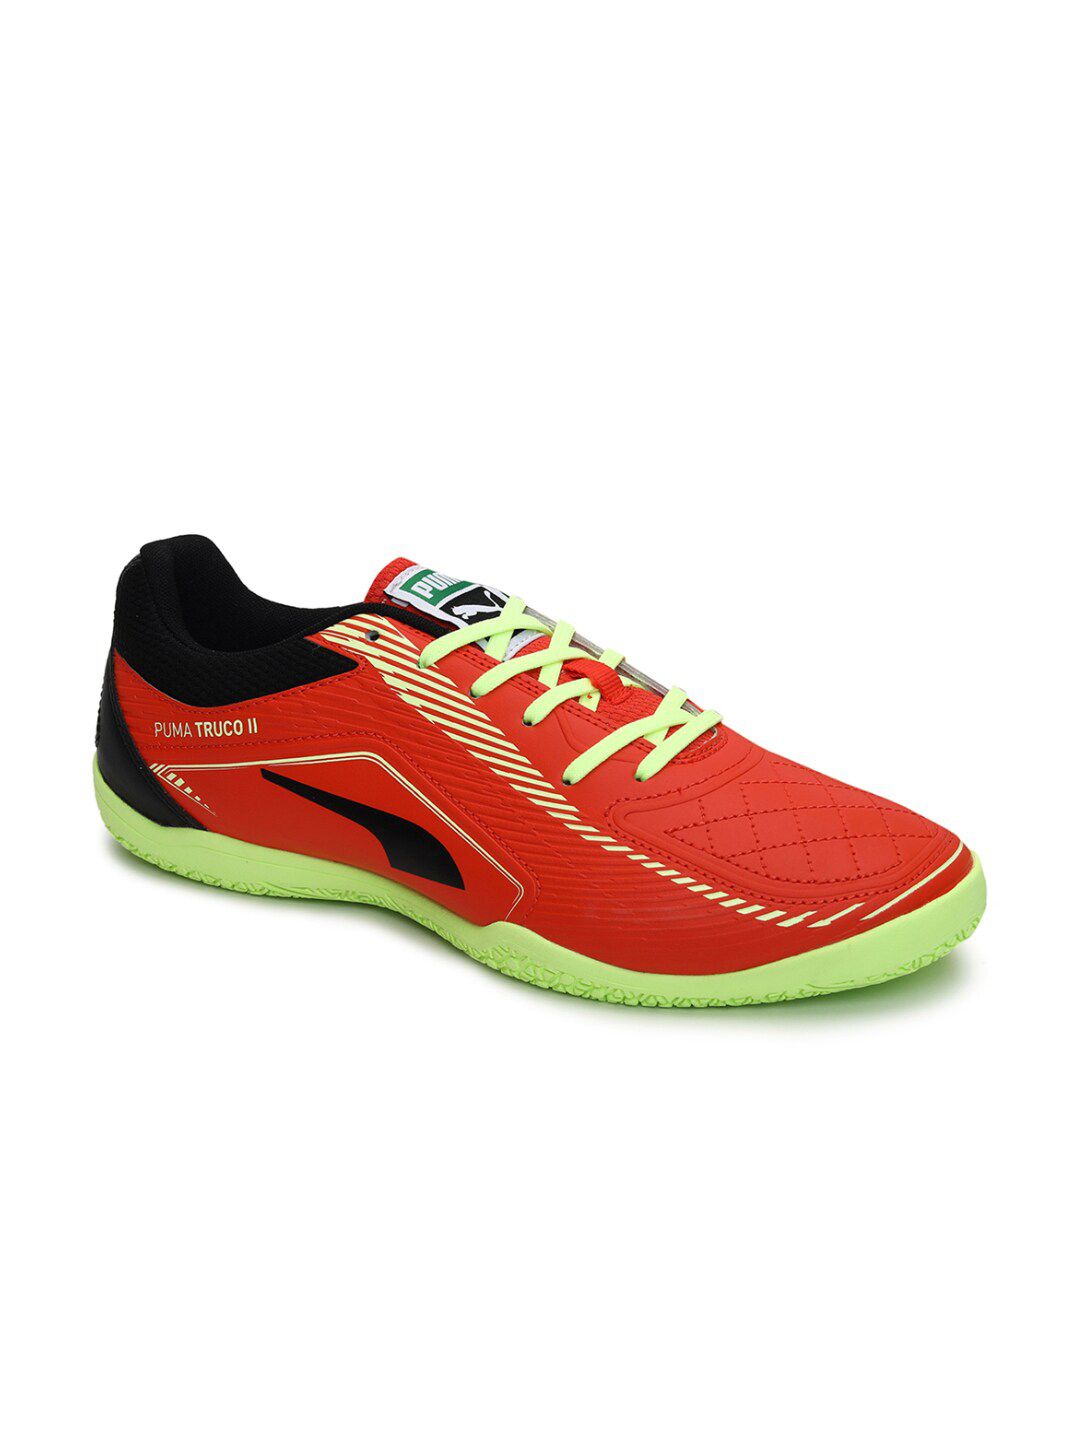 Puma Unisex Red Football Non-Marking Shoes Price in India